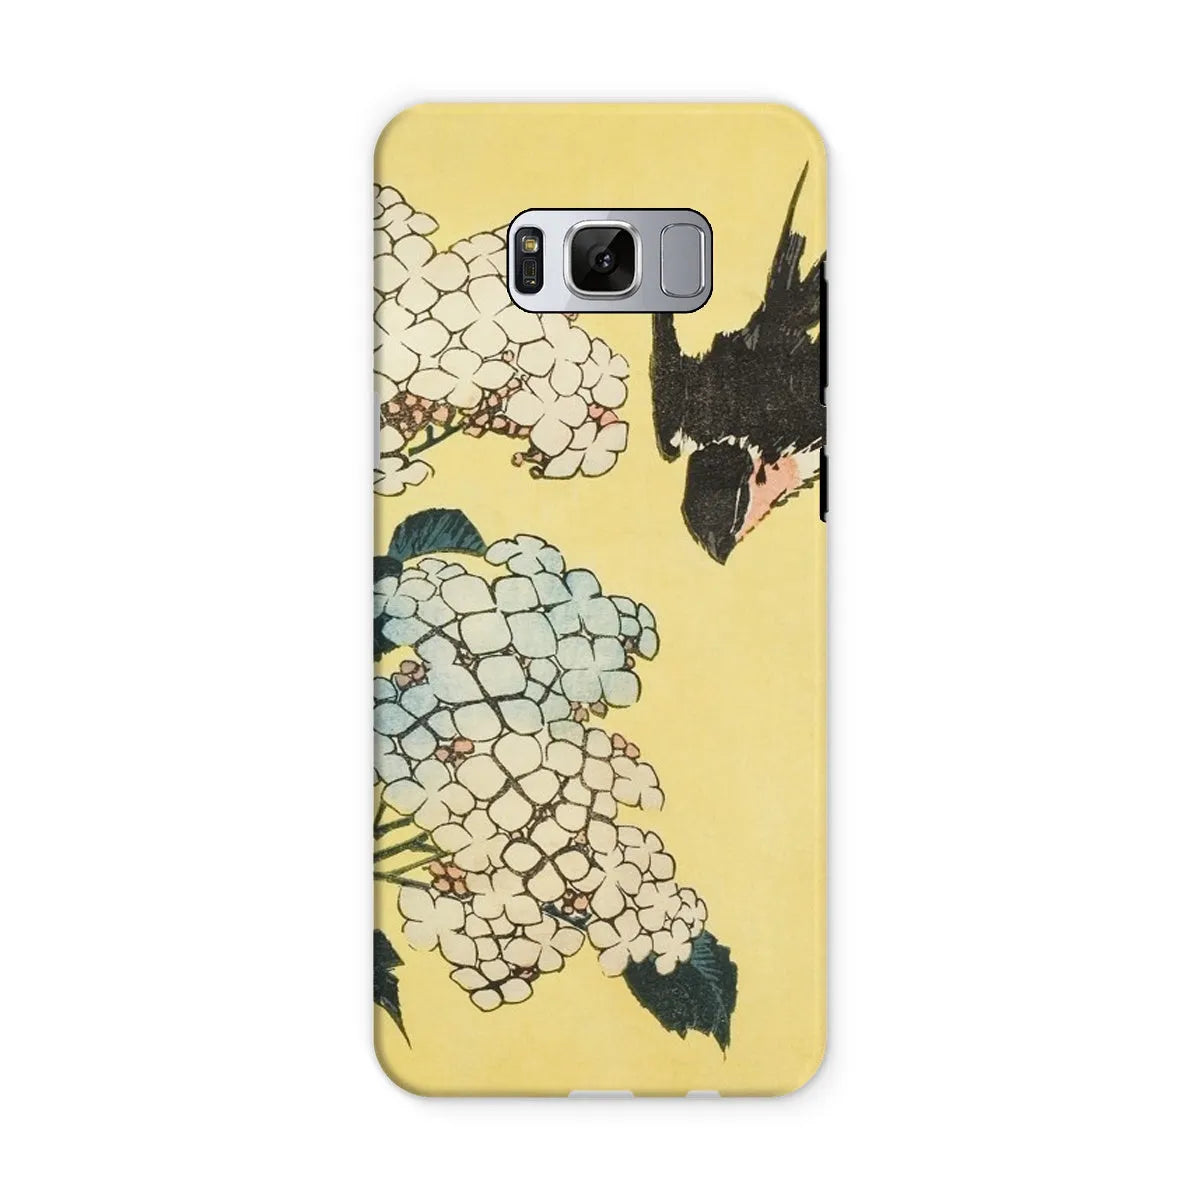 Hydrangea And Swallow - Japanese Art Phone Case - Hokusai - Samsung Galaxy S8 / Matte - Mobile Phone Cases - Aesthetic